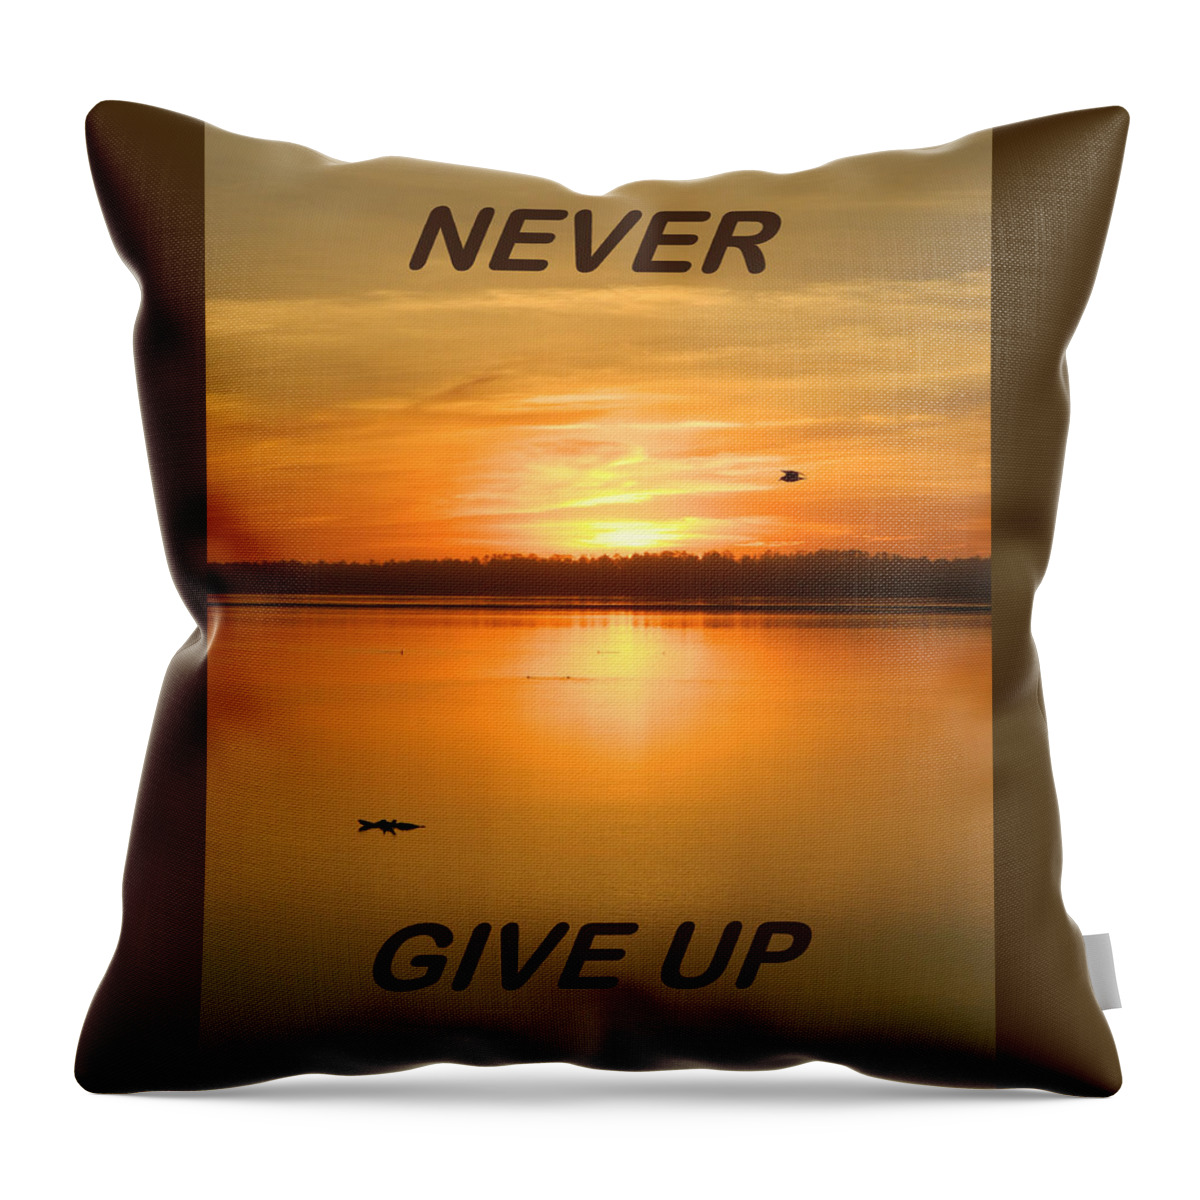 Galleryofhope Throw Pillow featuring the photograph Never Give Up by Gallery Of Hope 